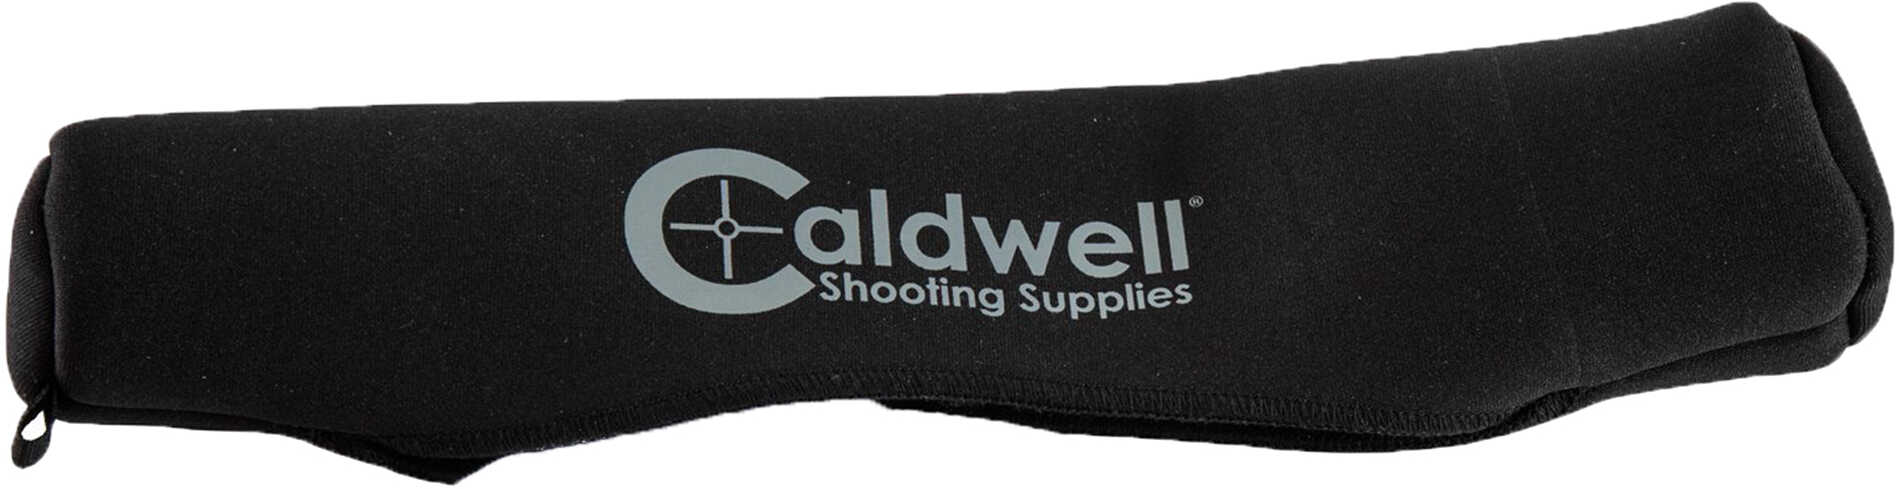 Caldwell Optic Armor Scope Cover X-Large, Black Md: 110037